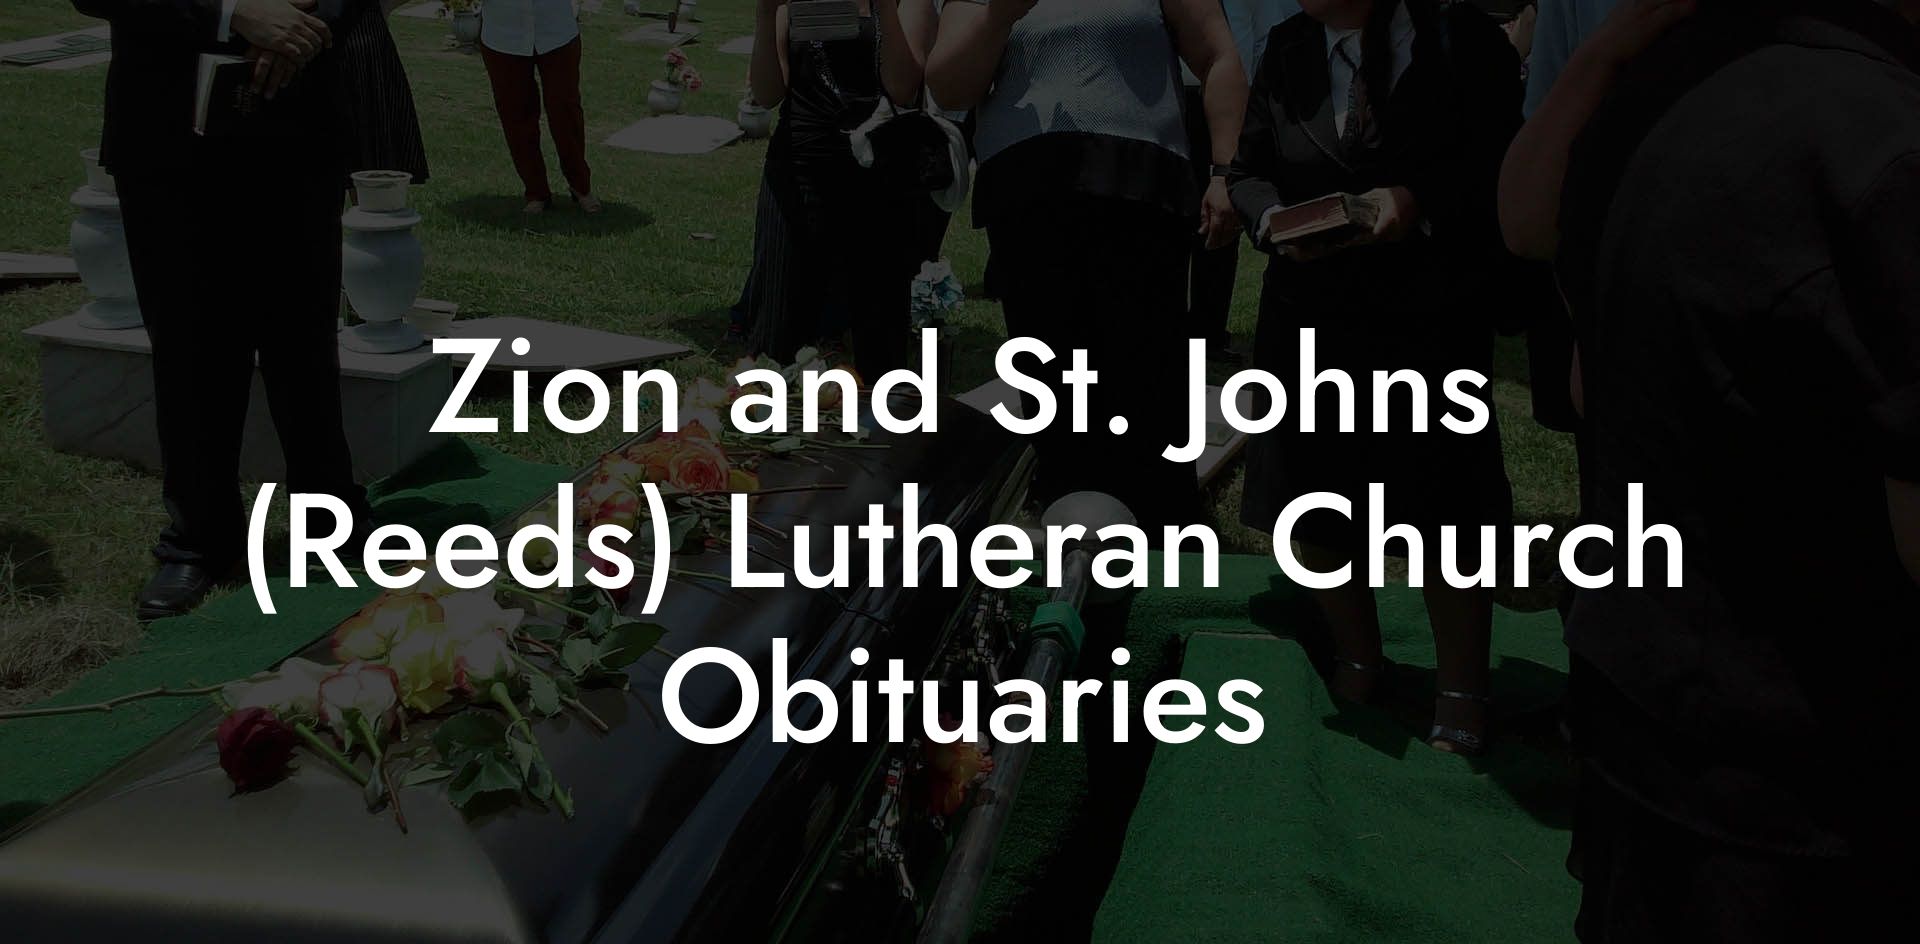 Zion and St. Johns (Reeds) Lutheran Church Obituaries